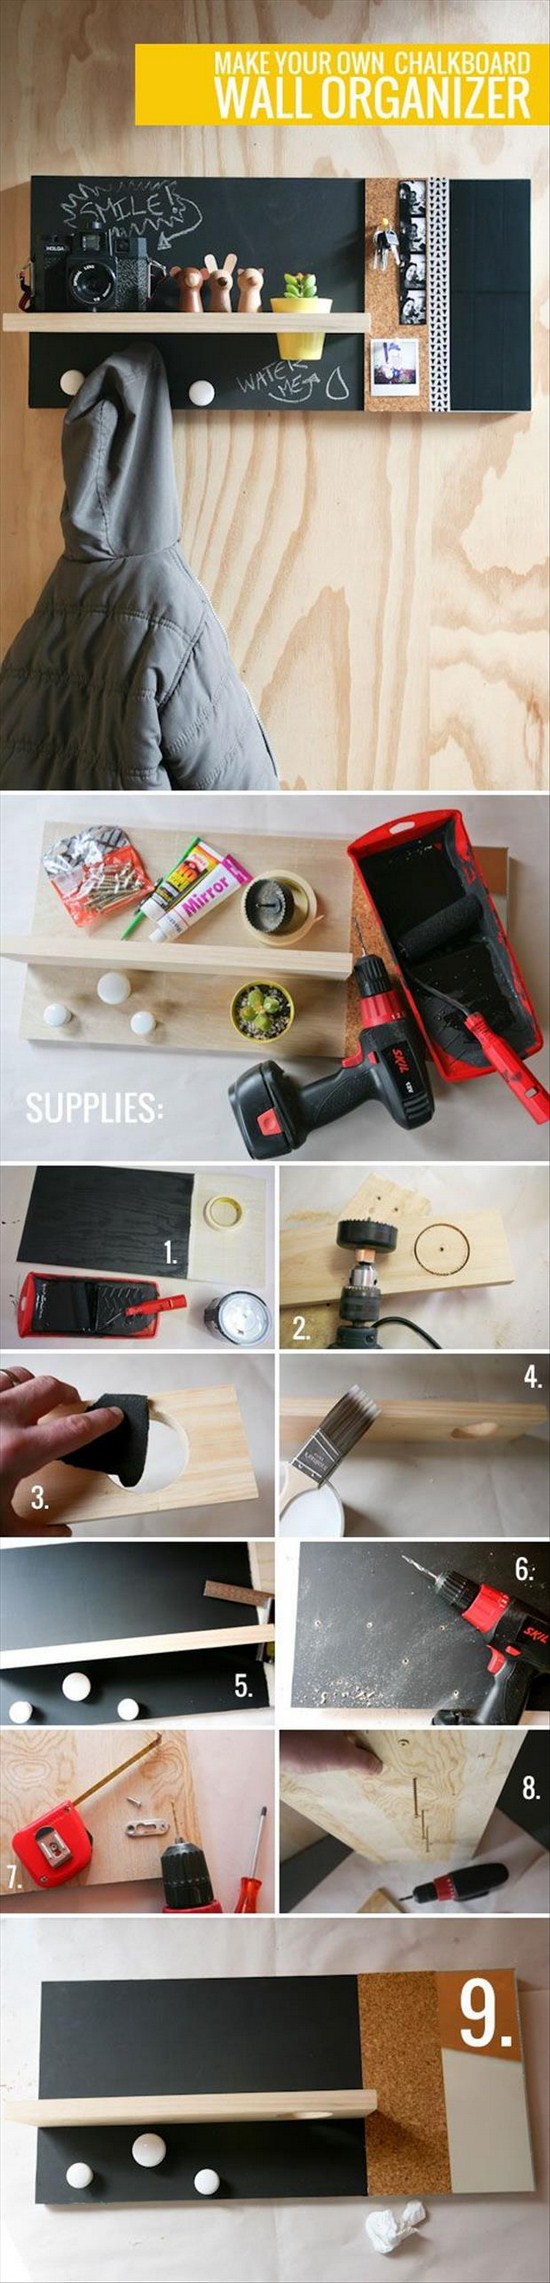 Awesome-Craft-Ideas-007